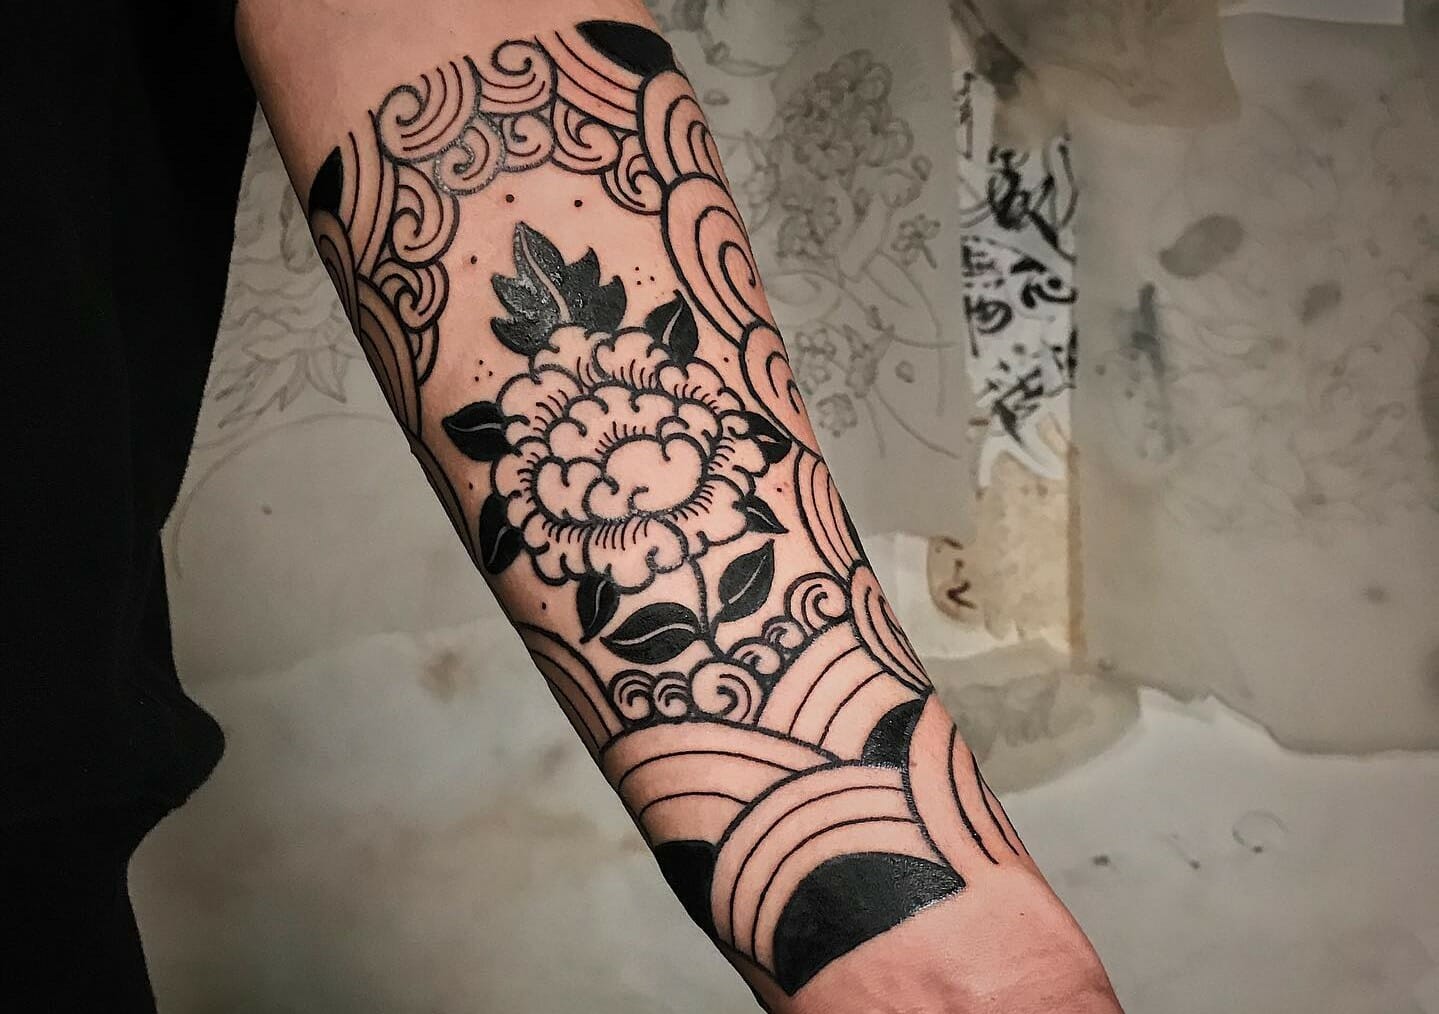 6. Forearm Sleeve Tattoos for Men - wide 2